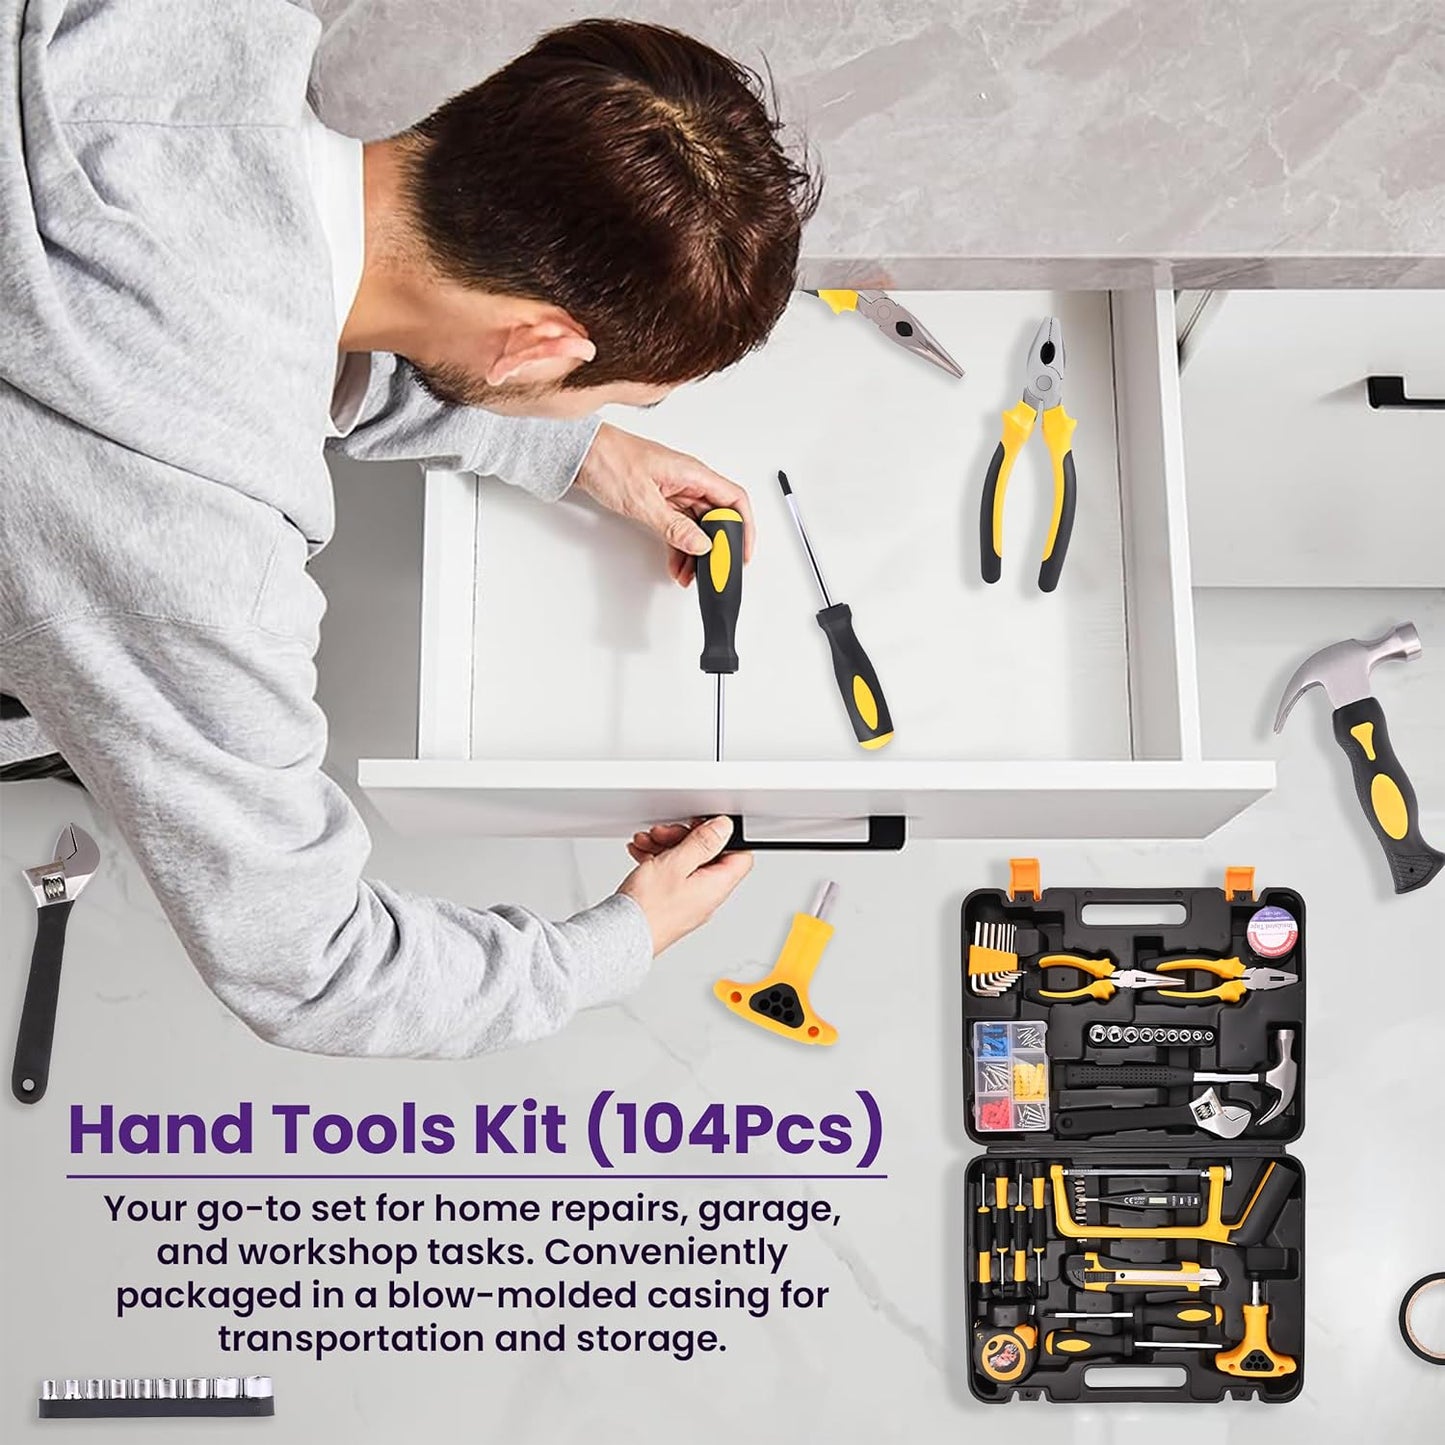 Asian Paints TruCare Hand Tools Kit (104 Pieces) for Household DIY & Emergency Maintenance | Compact & Portable set of Measuring Tape, Hammer, Plier, Wrench, Digital voltage tester, Screwdrivers